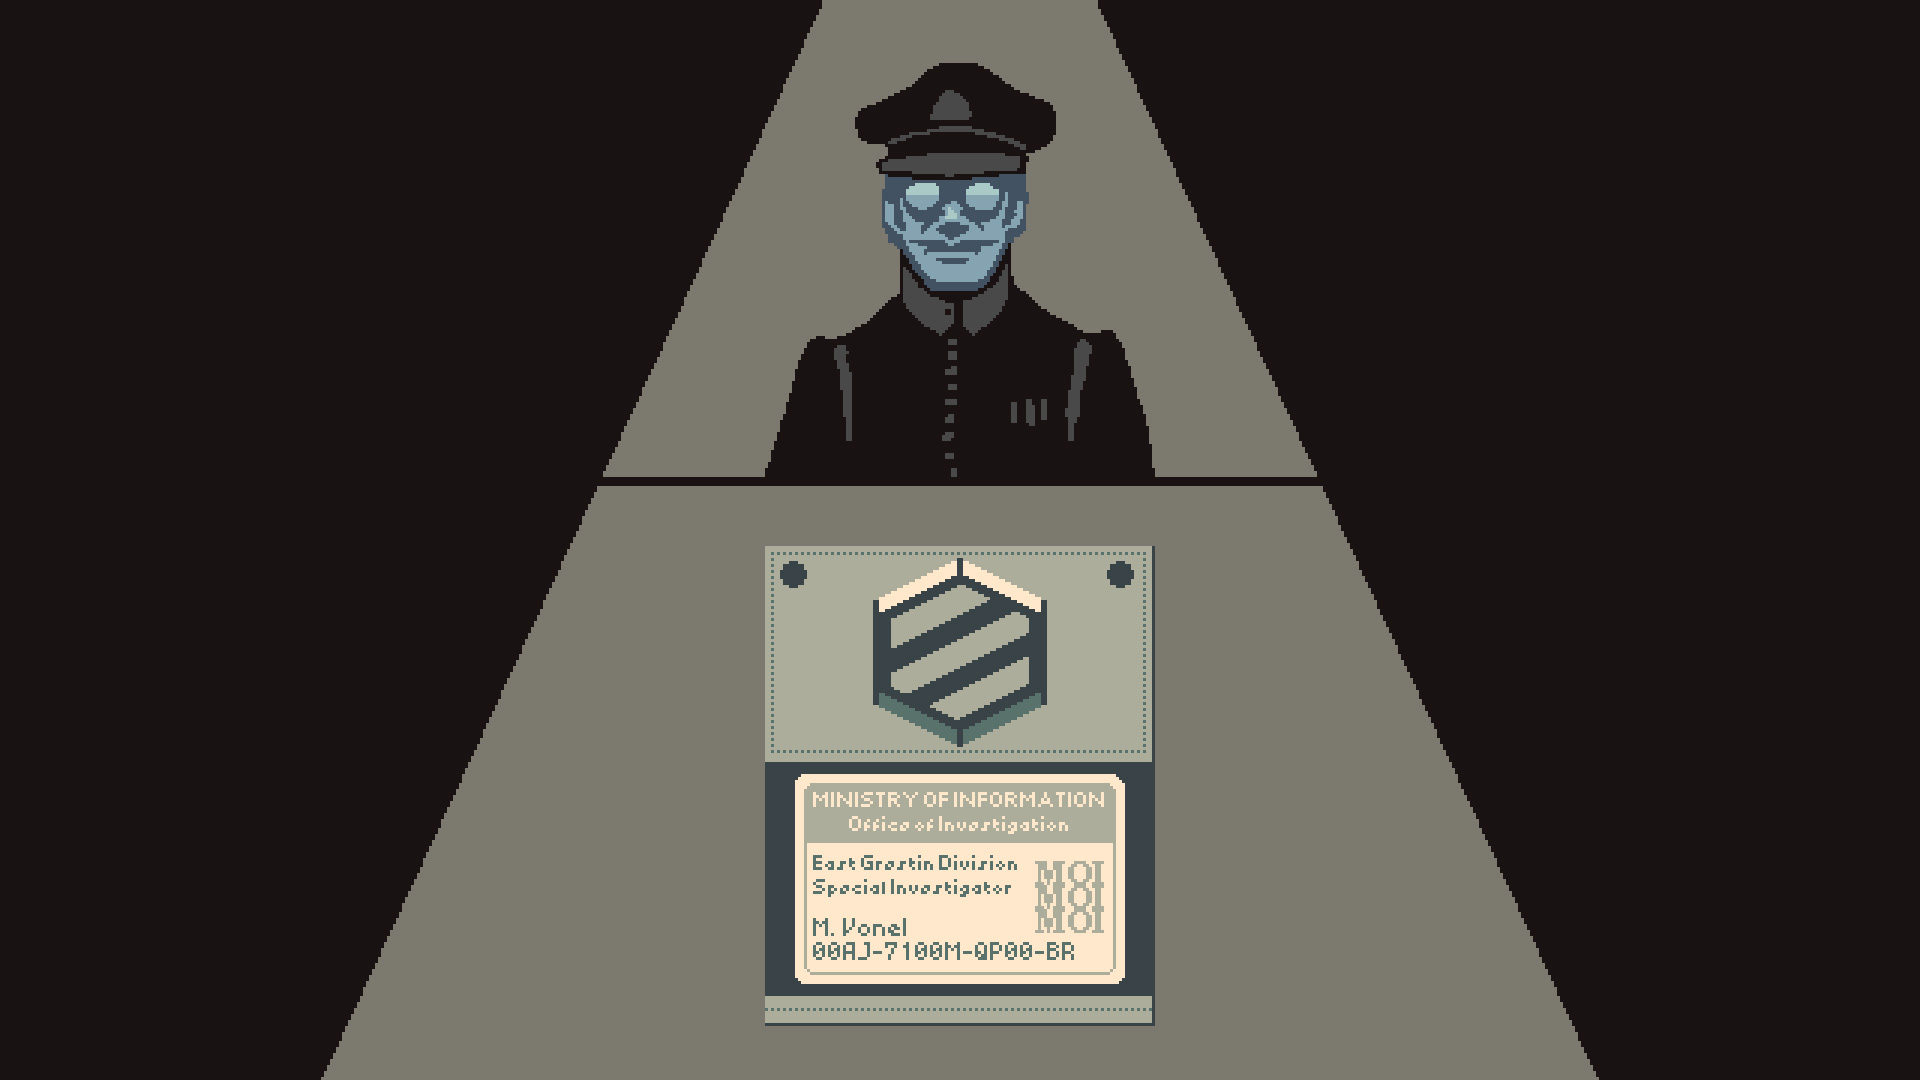 Steam Card Exchange :: Showcase :: Papers, Please